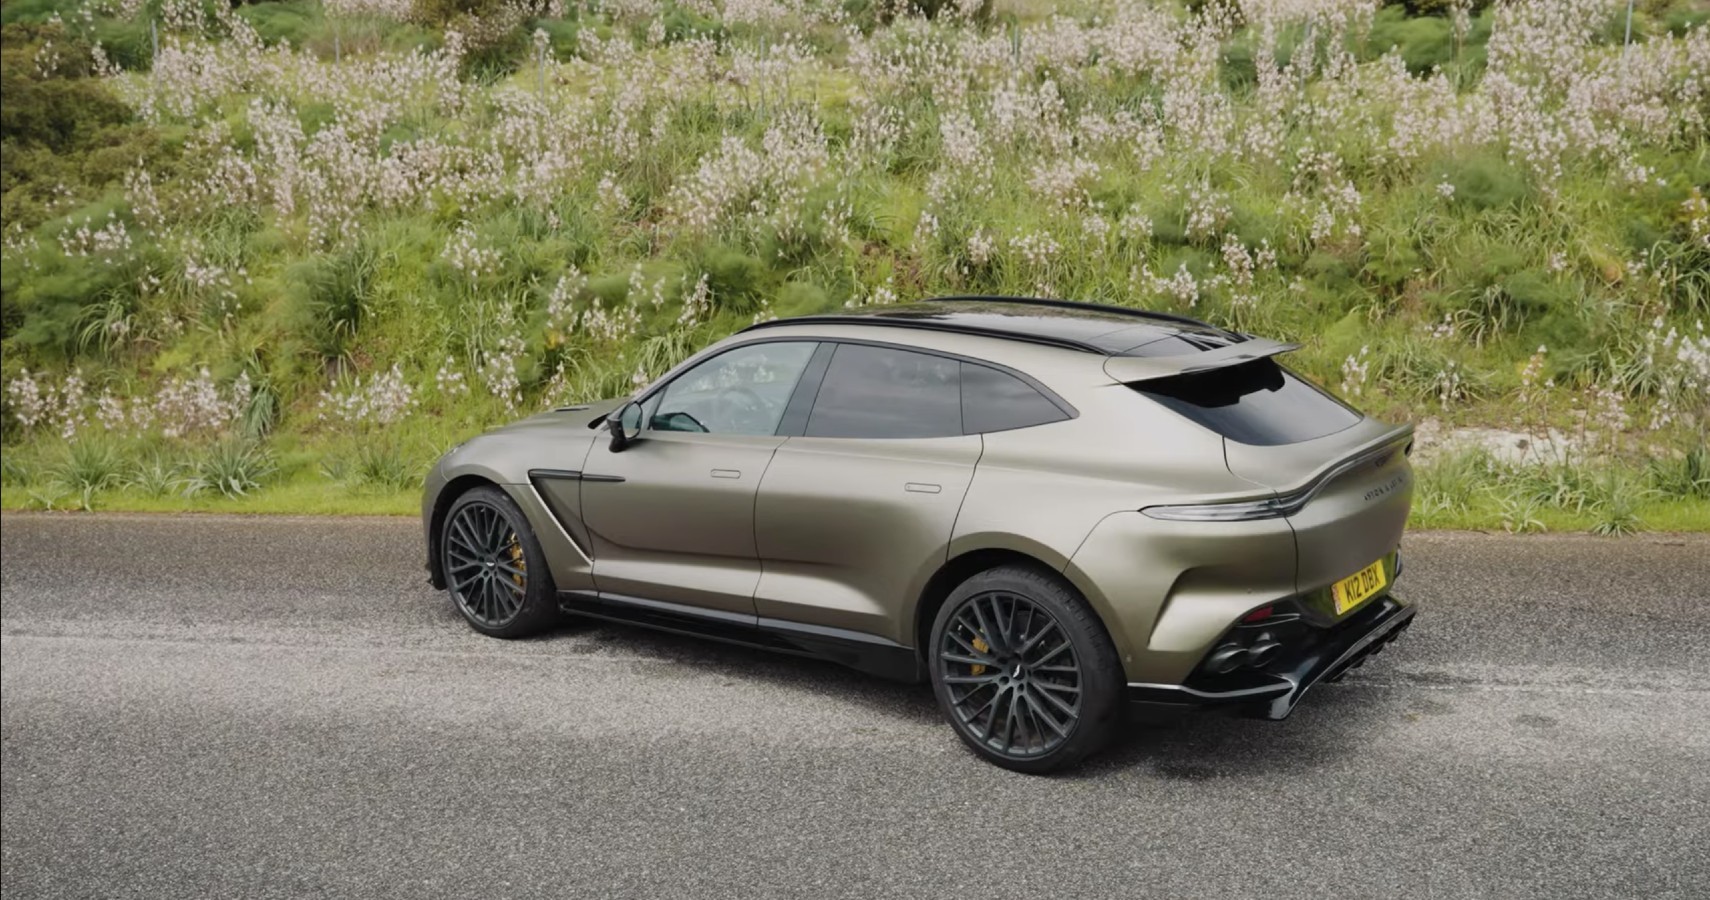 2023 Aston Martin DBX 707 Drives, Handles, and Performs Like a Jacked